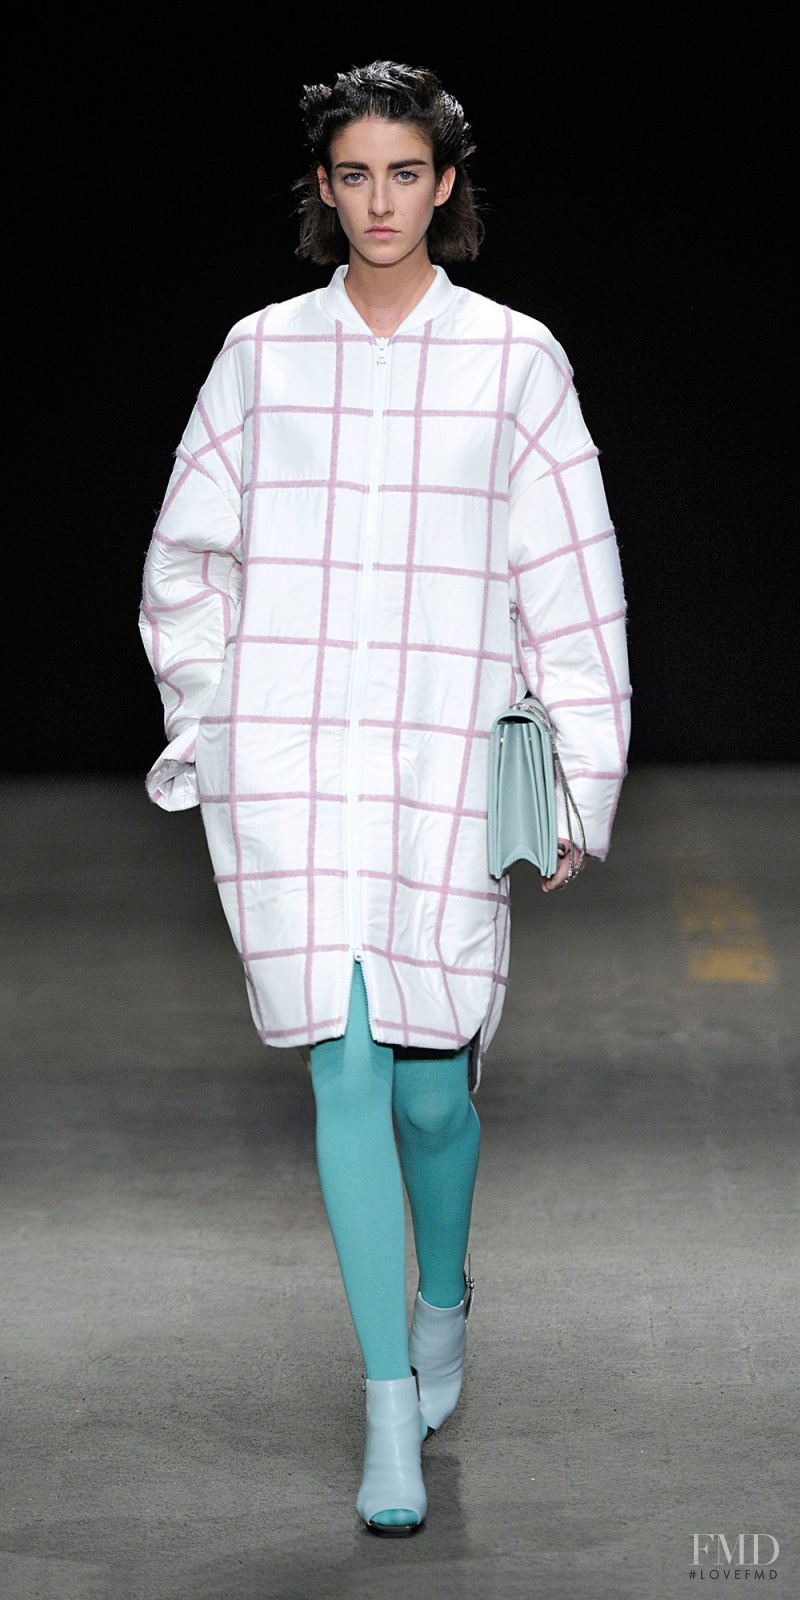 Cristina Herrmann featured in  the 3.1 Phillip Lim fashion show for Autumn/Winter 2014